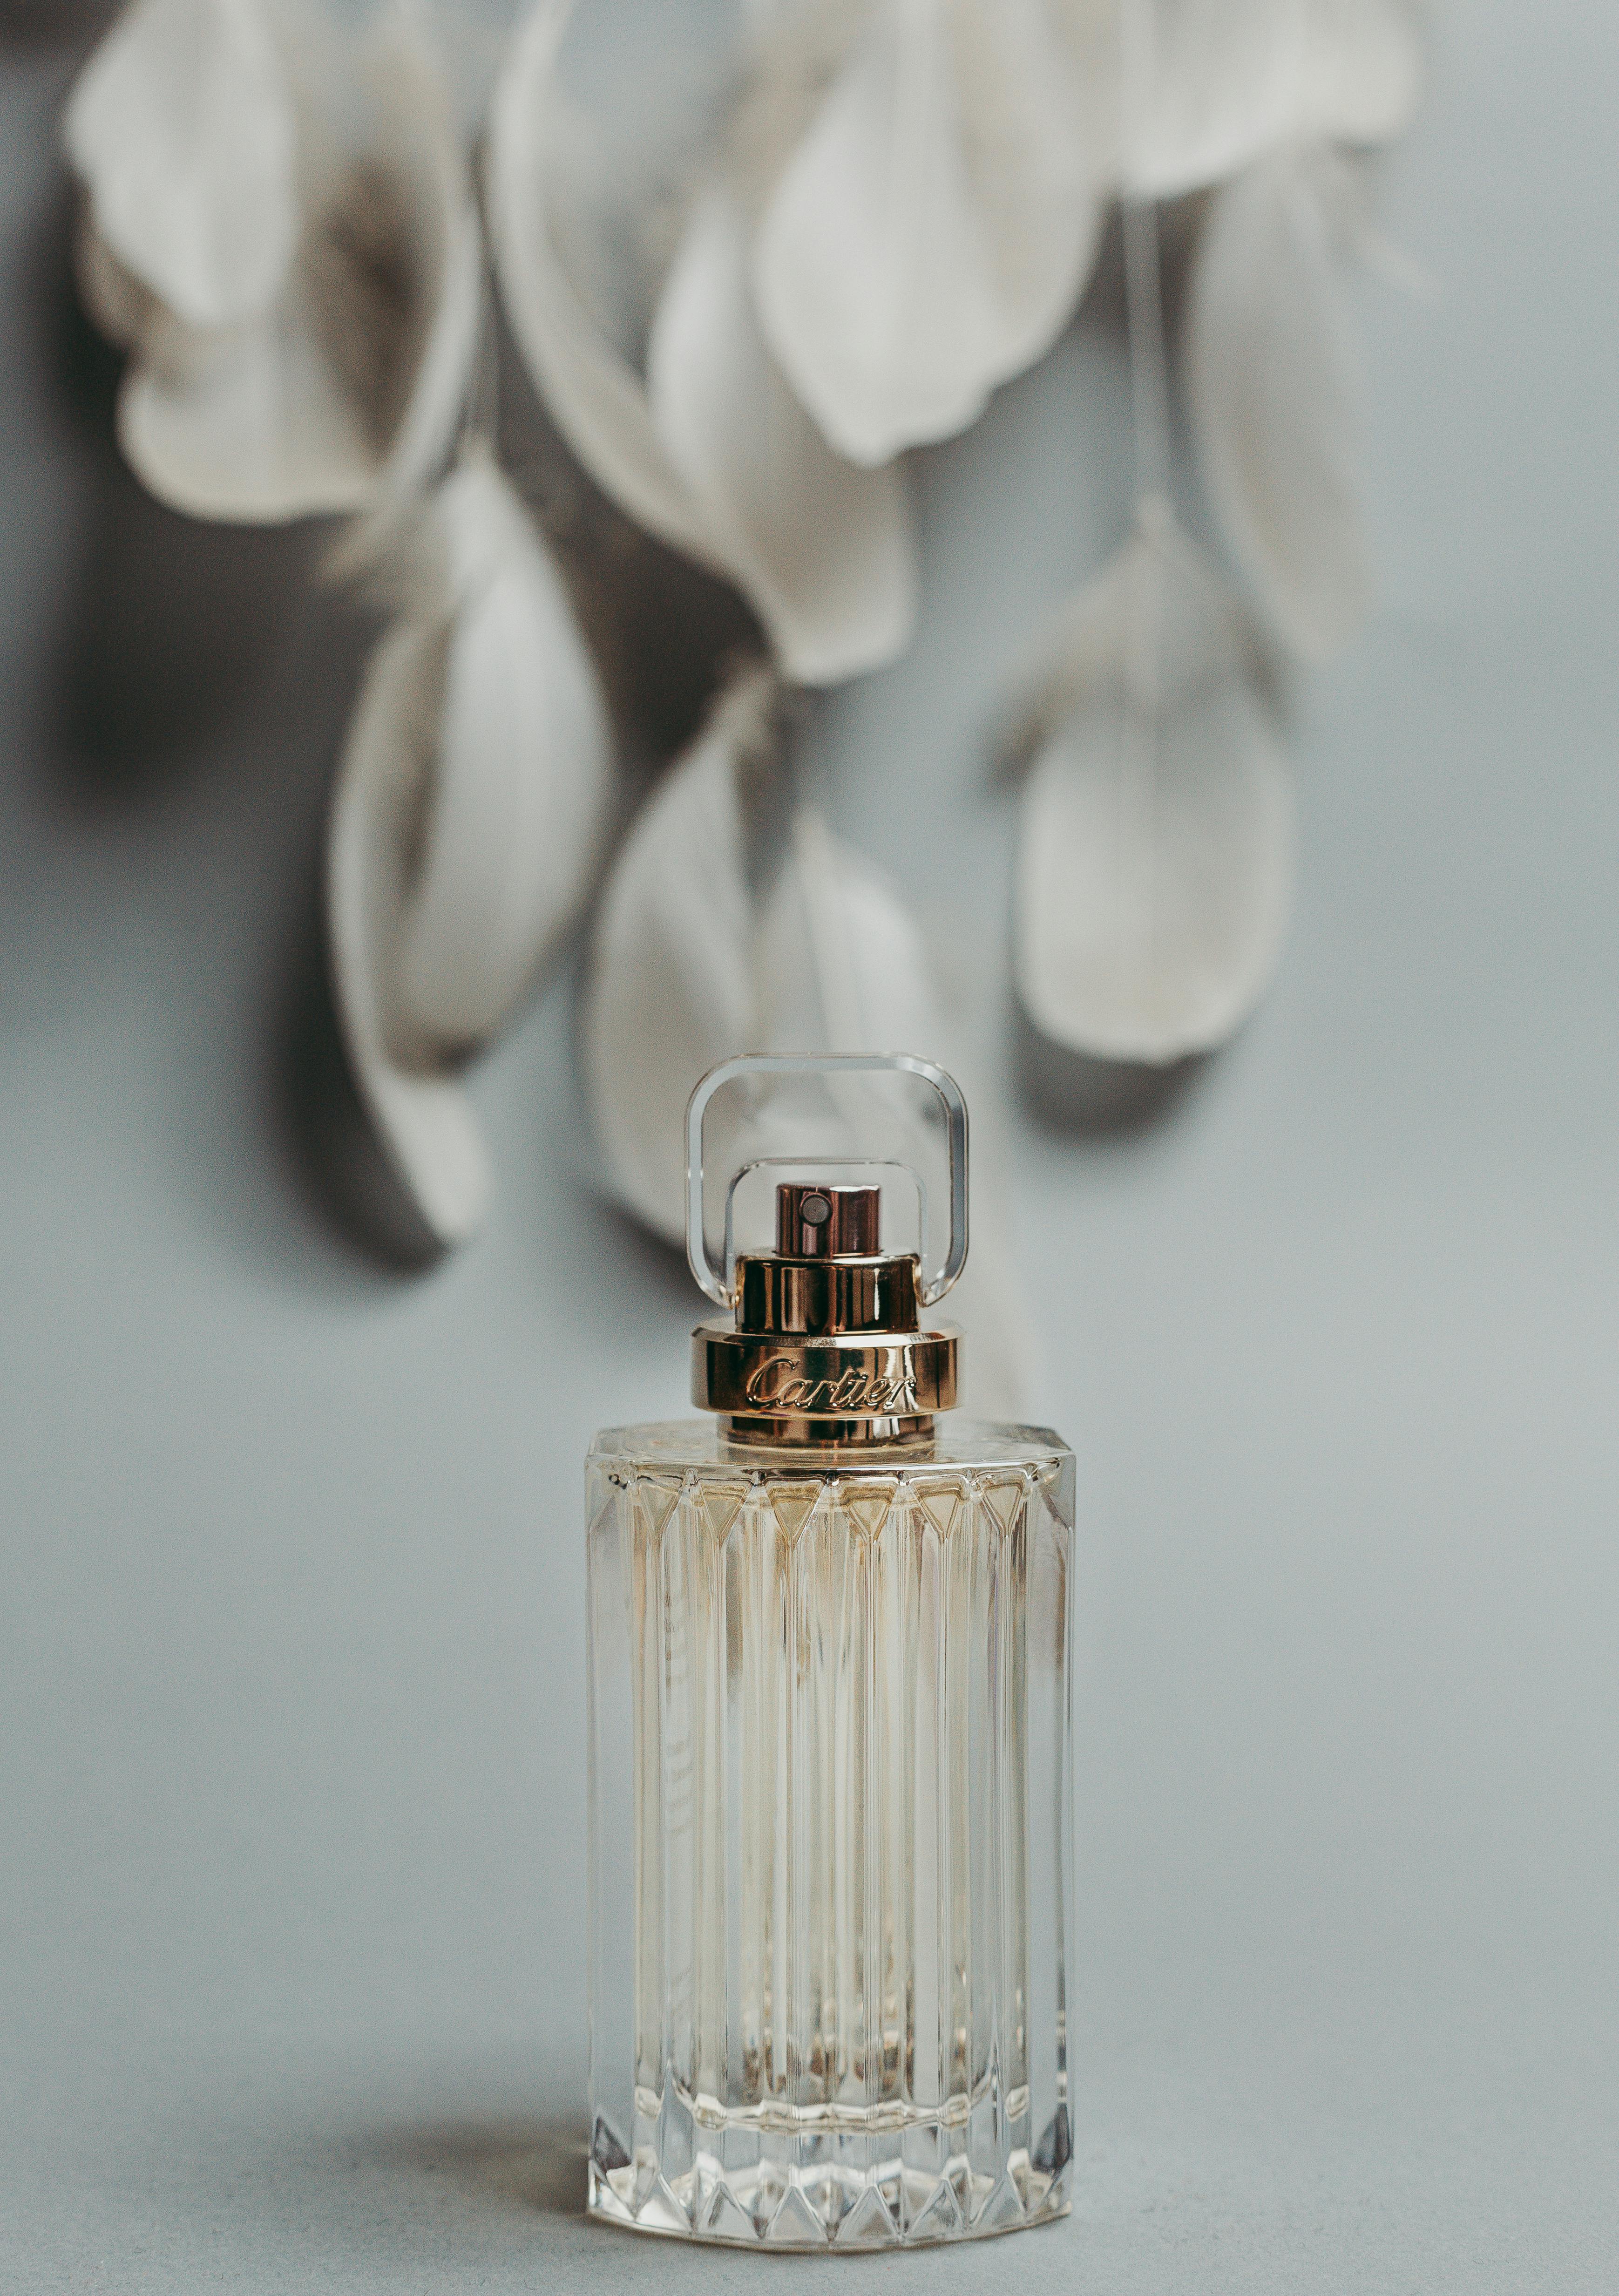 A bottle of expensive perfume | Source: Pexels